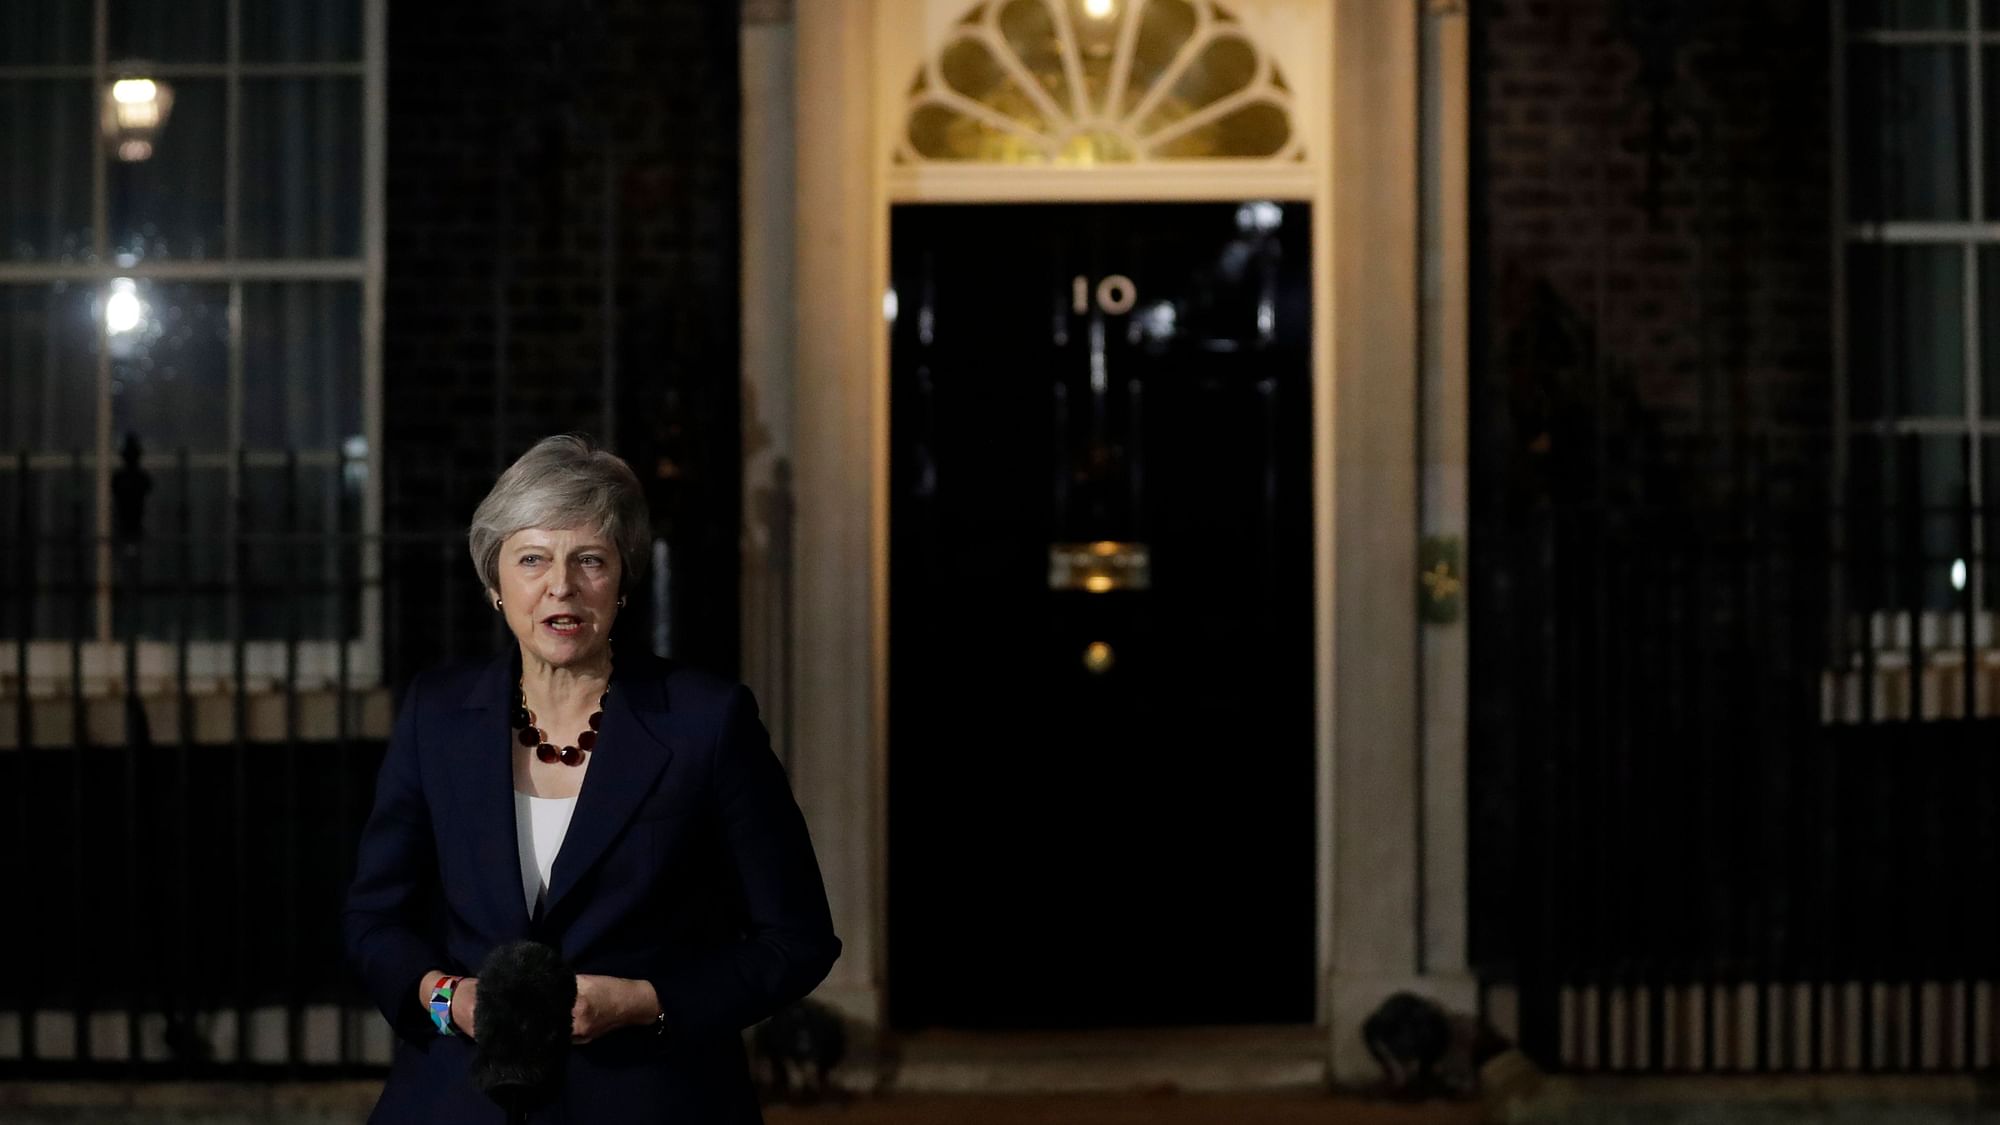 Britain’s Prime Minister Theresa May delivers a speech outside 10 Downing Street in London.